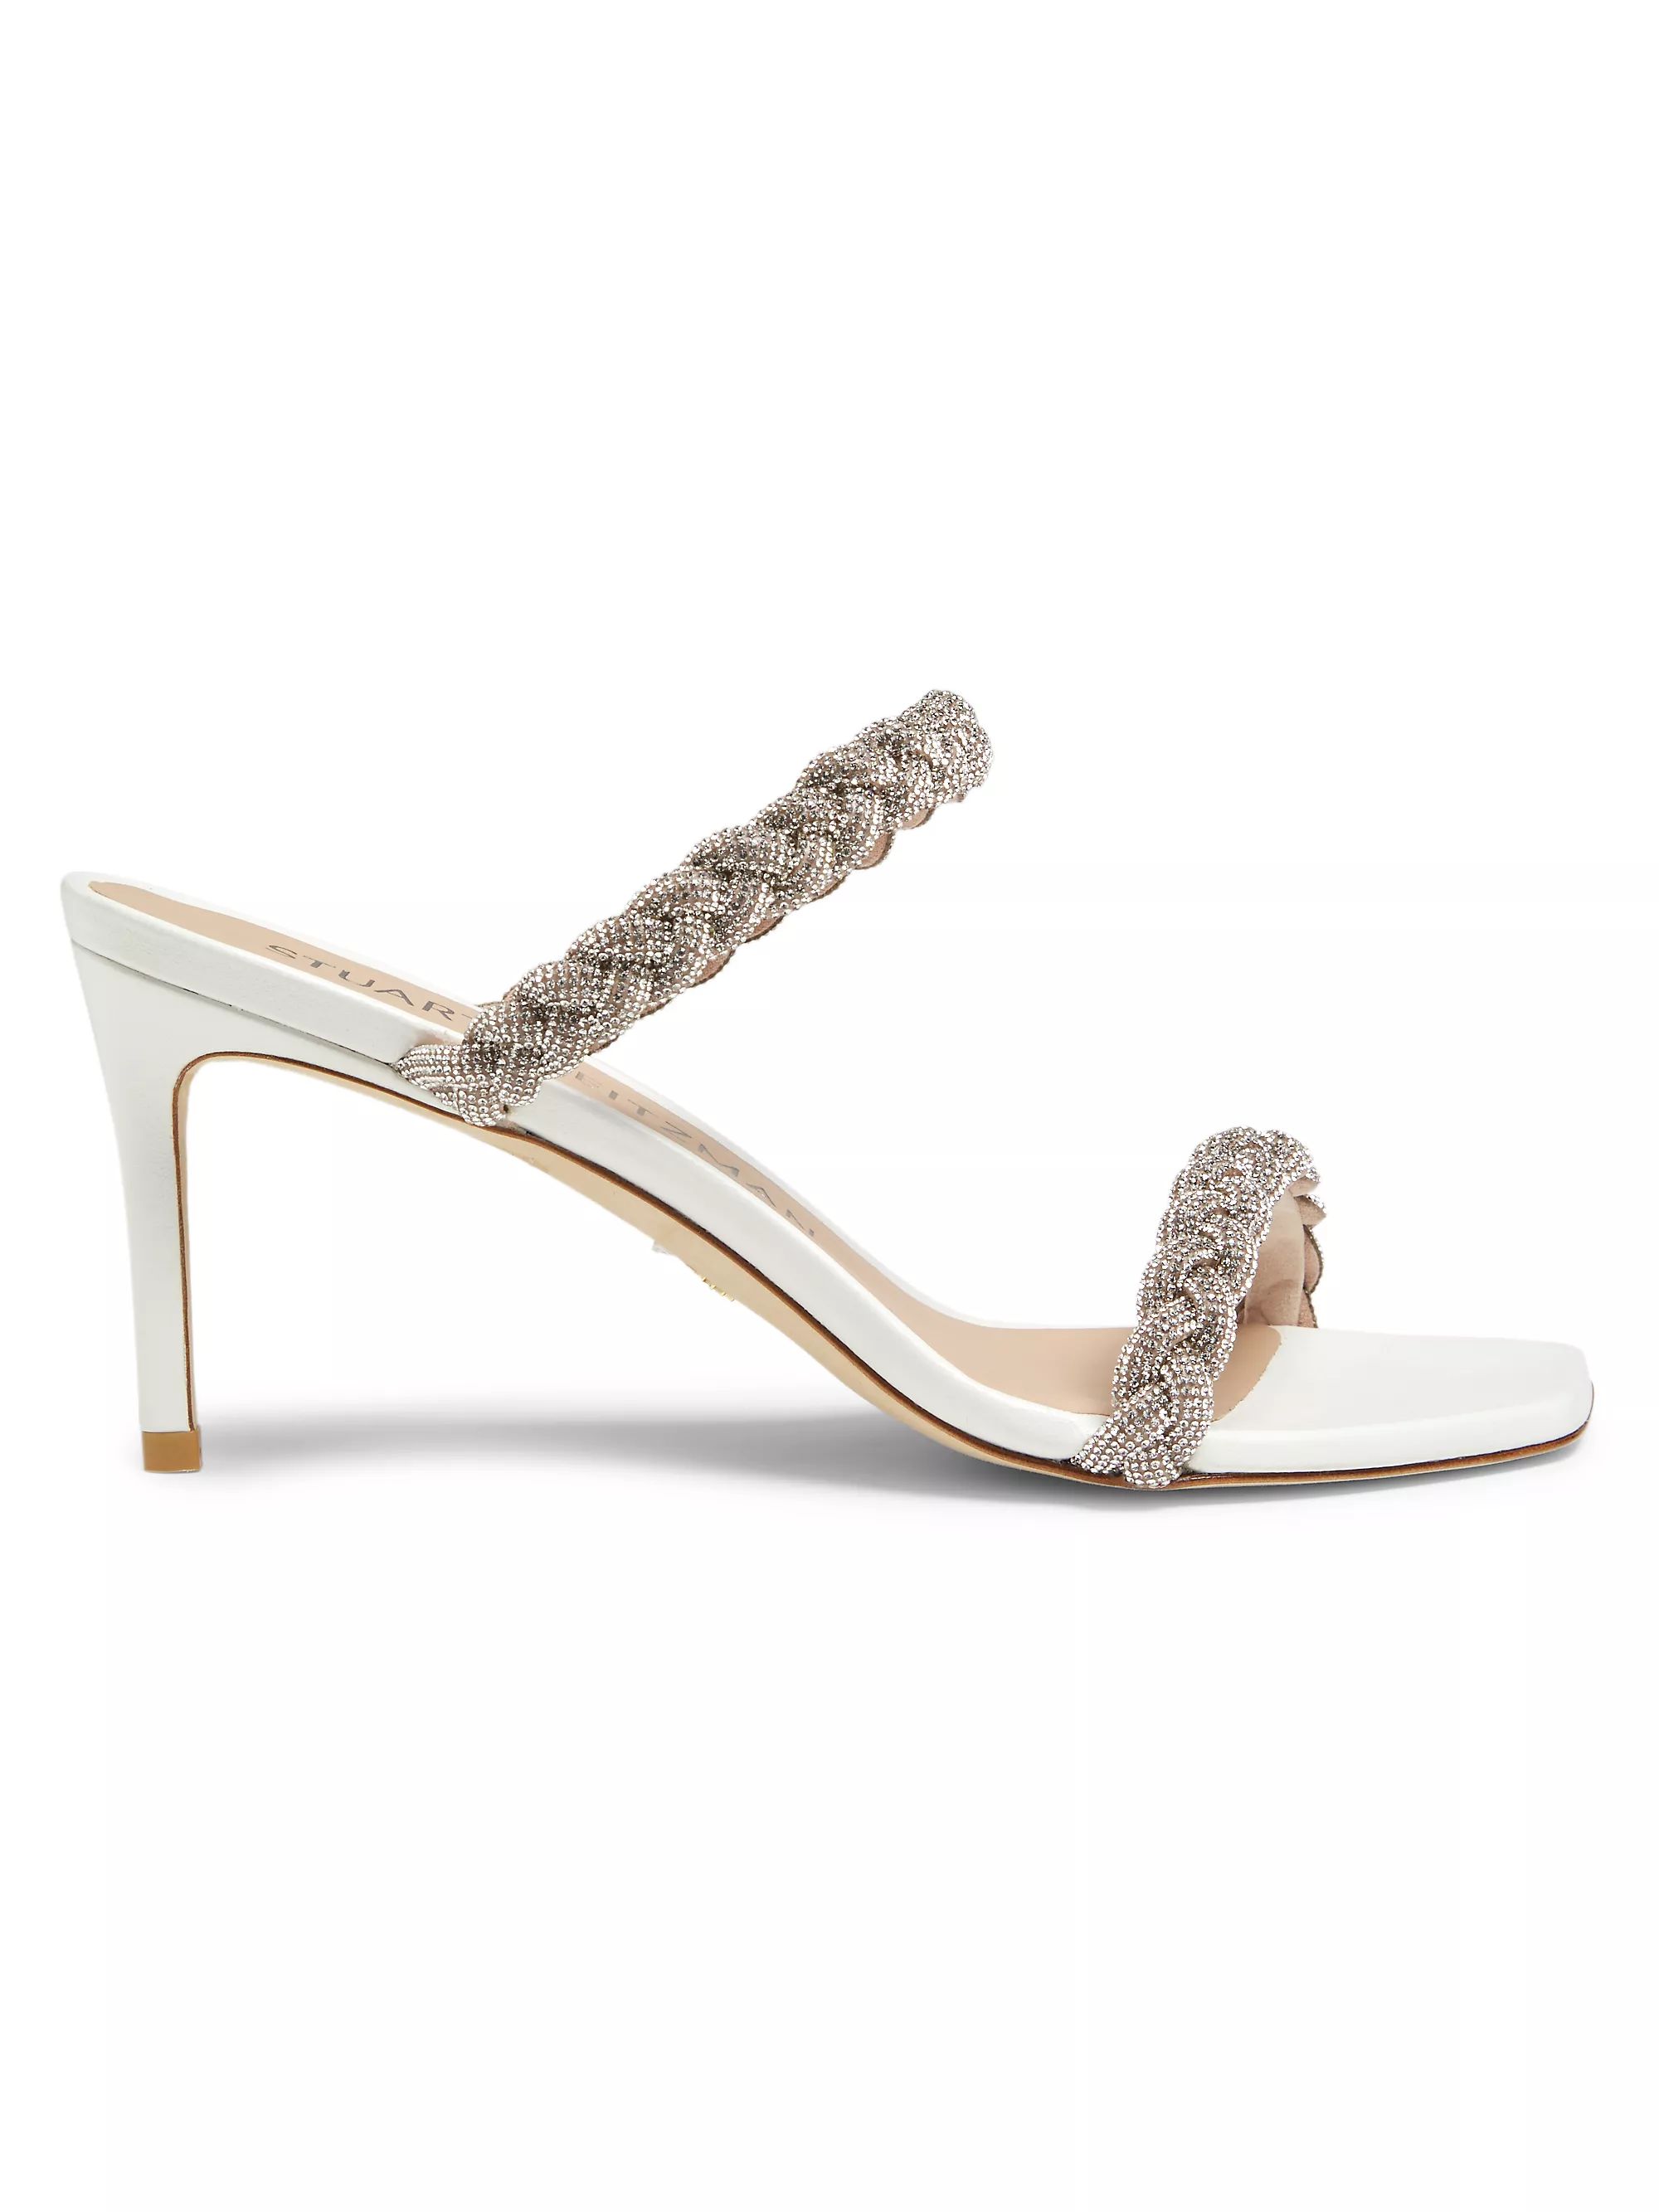 Addison 75MM Lacquered Leather Sandals | Saks Fifth Avenue